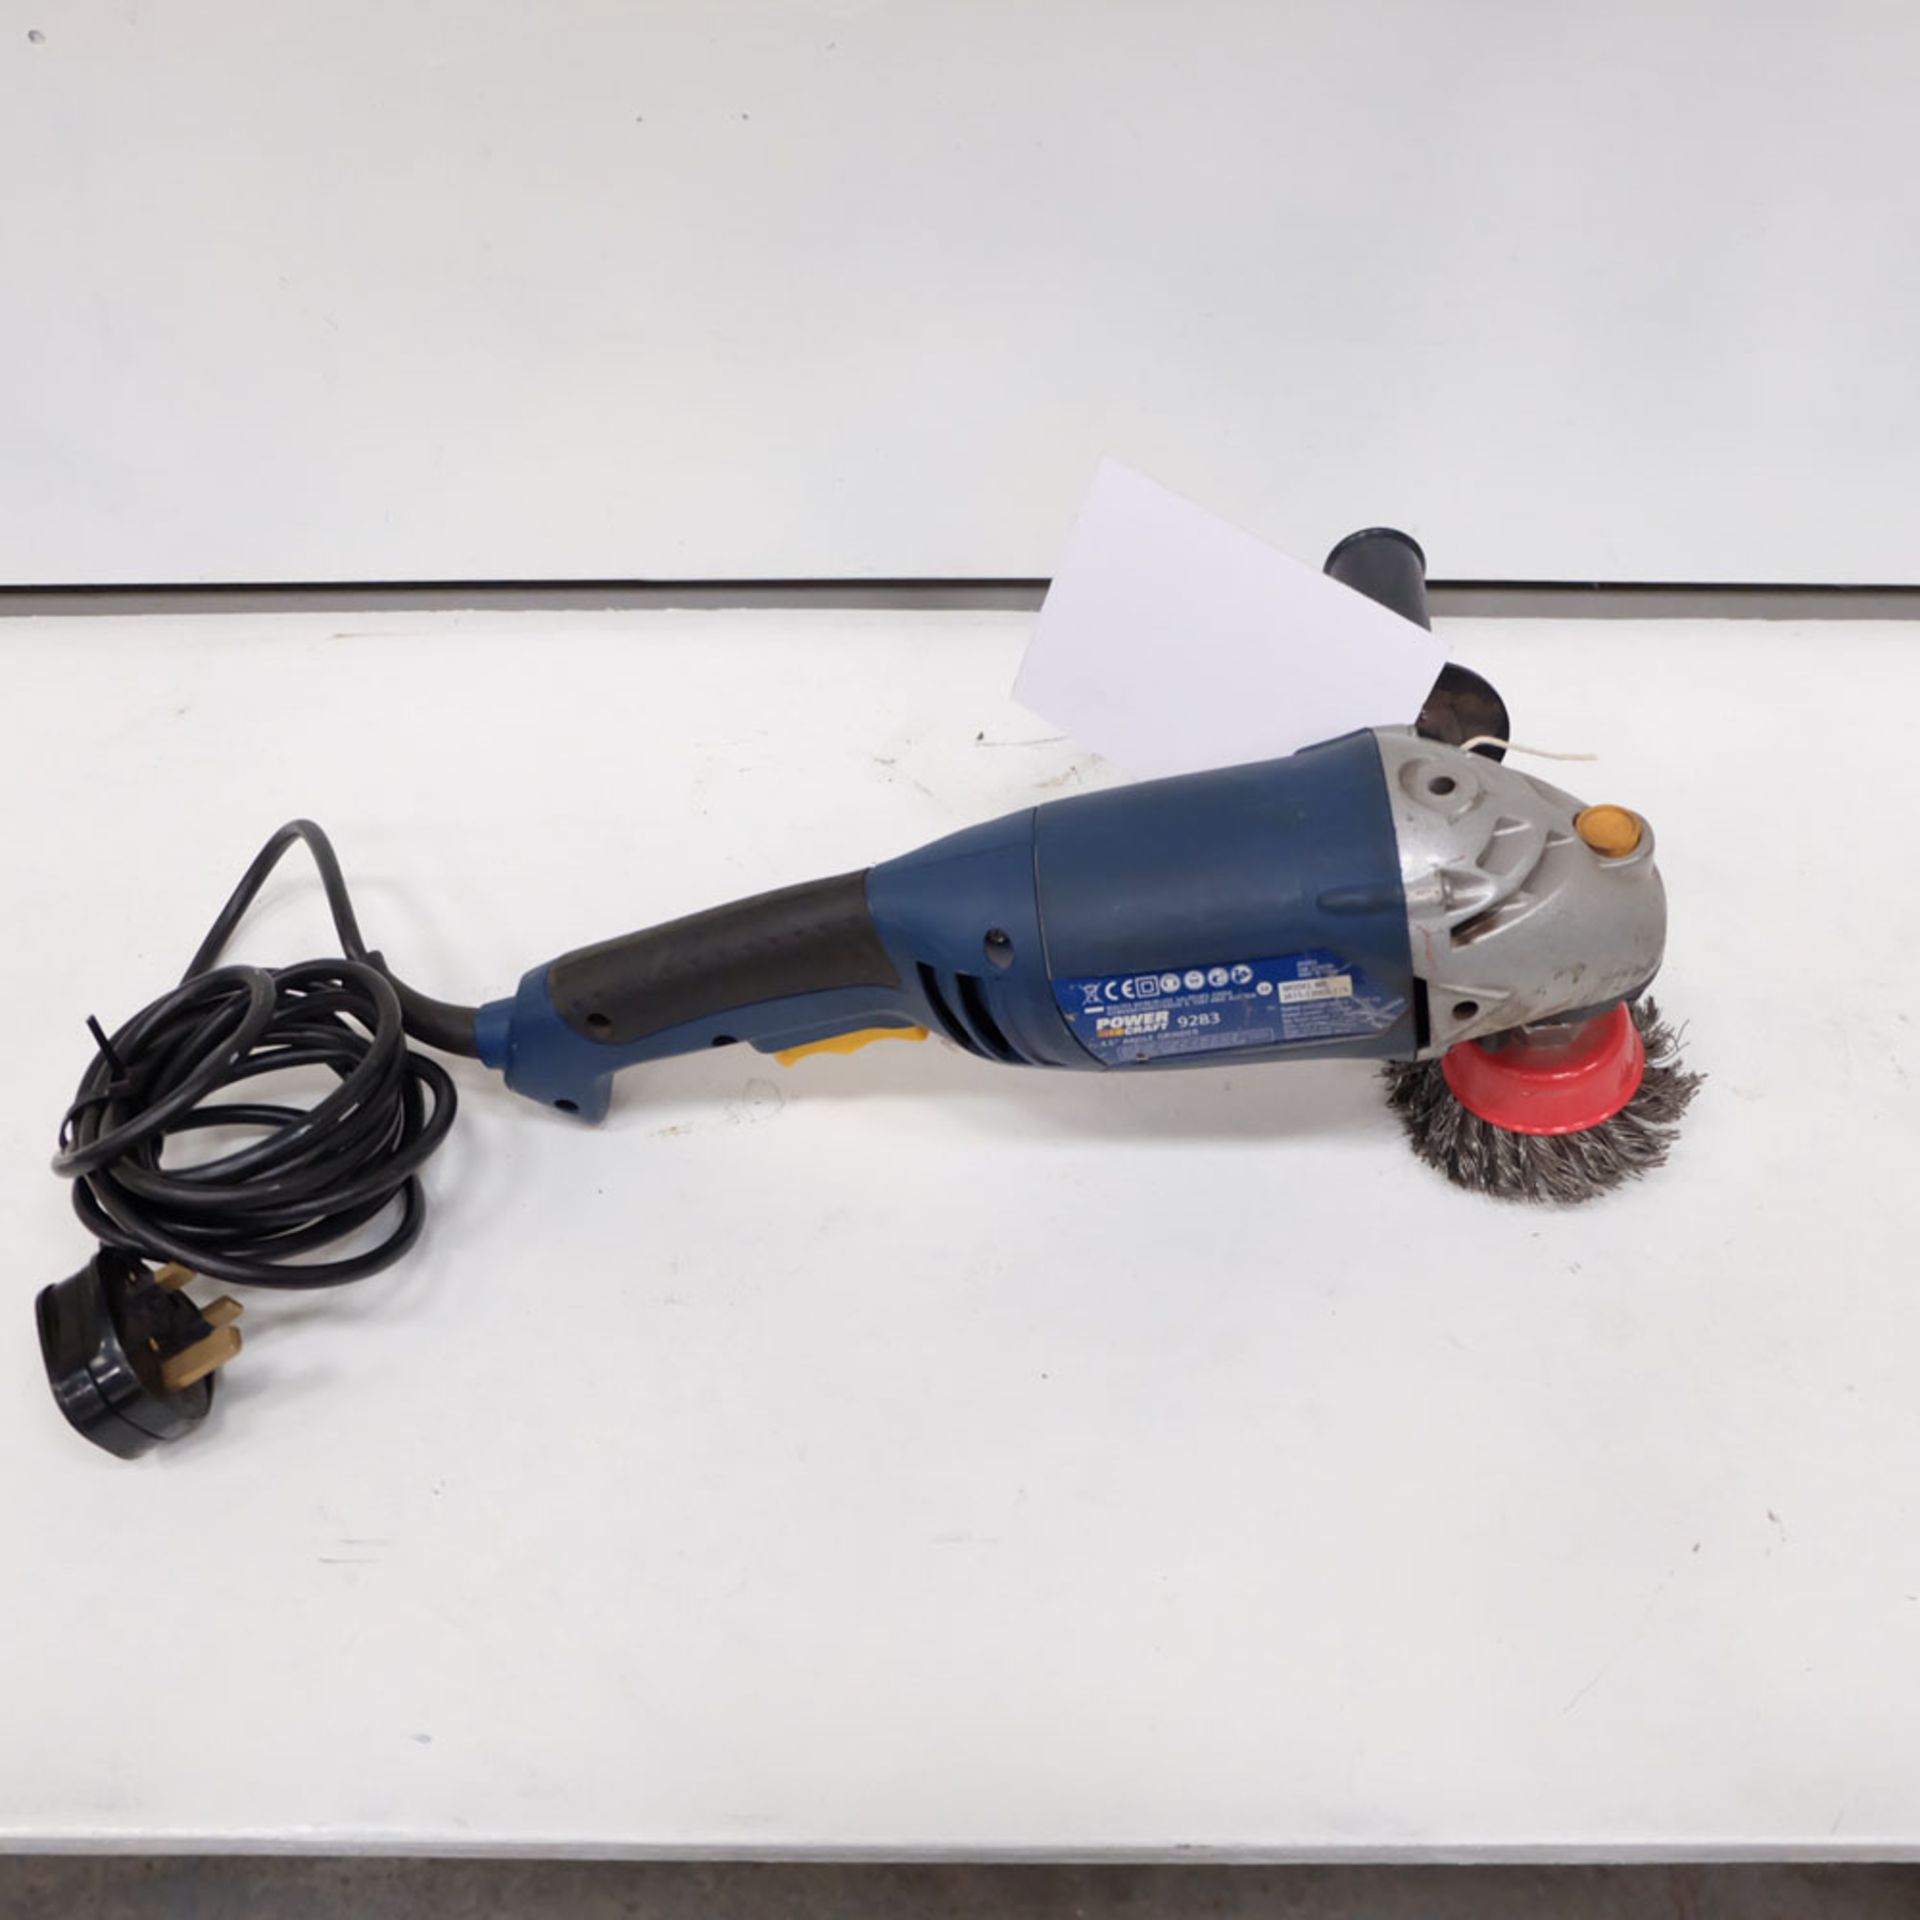 Power Craft 1200W Angle Grinder. - Image 3 of 5